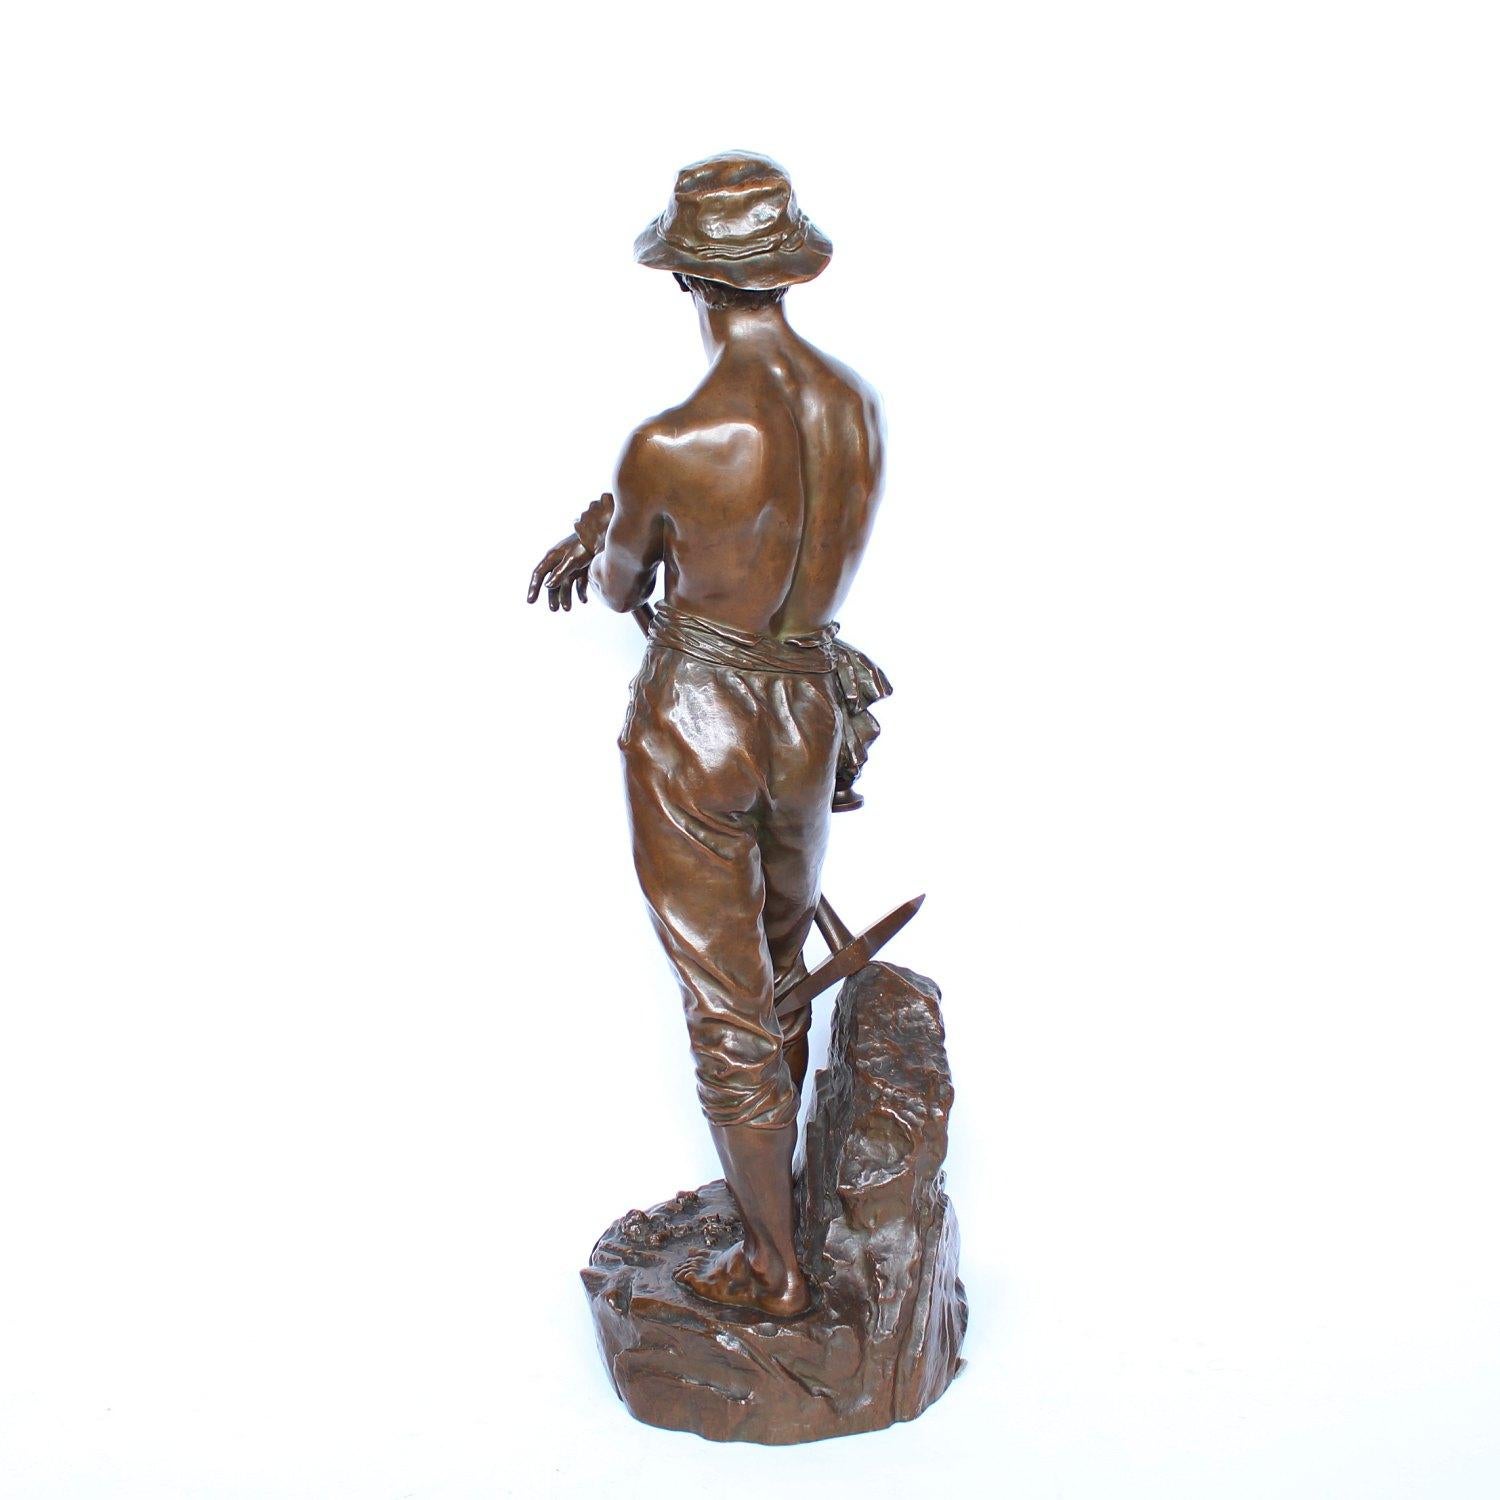 Aesthetic Movement 19th Century Large Bronze Sculpture of a Bare Chested Man, French, circa 1890